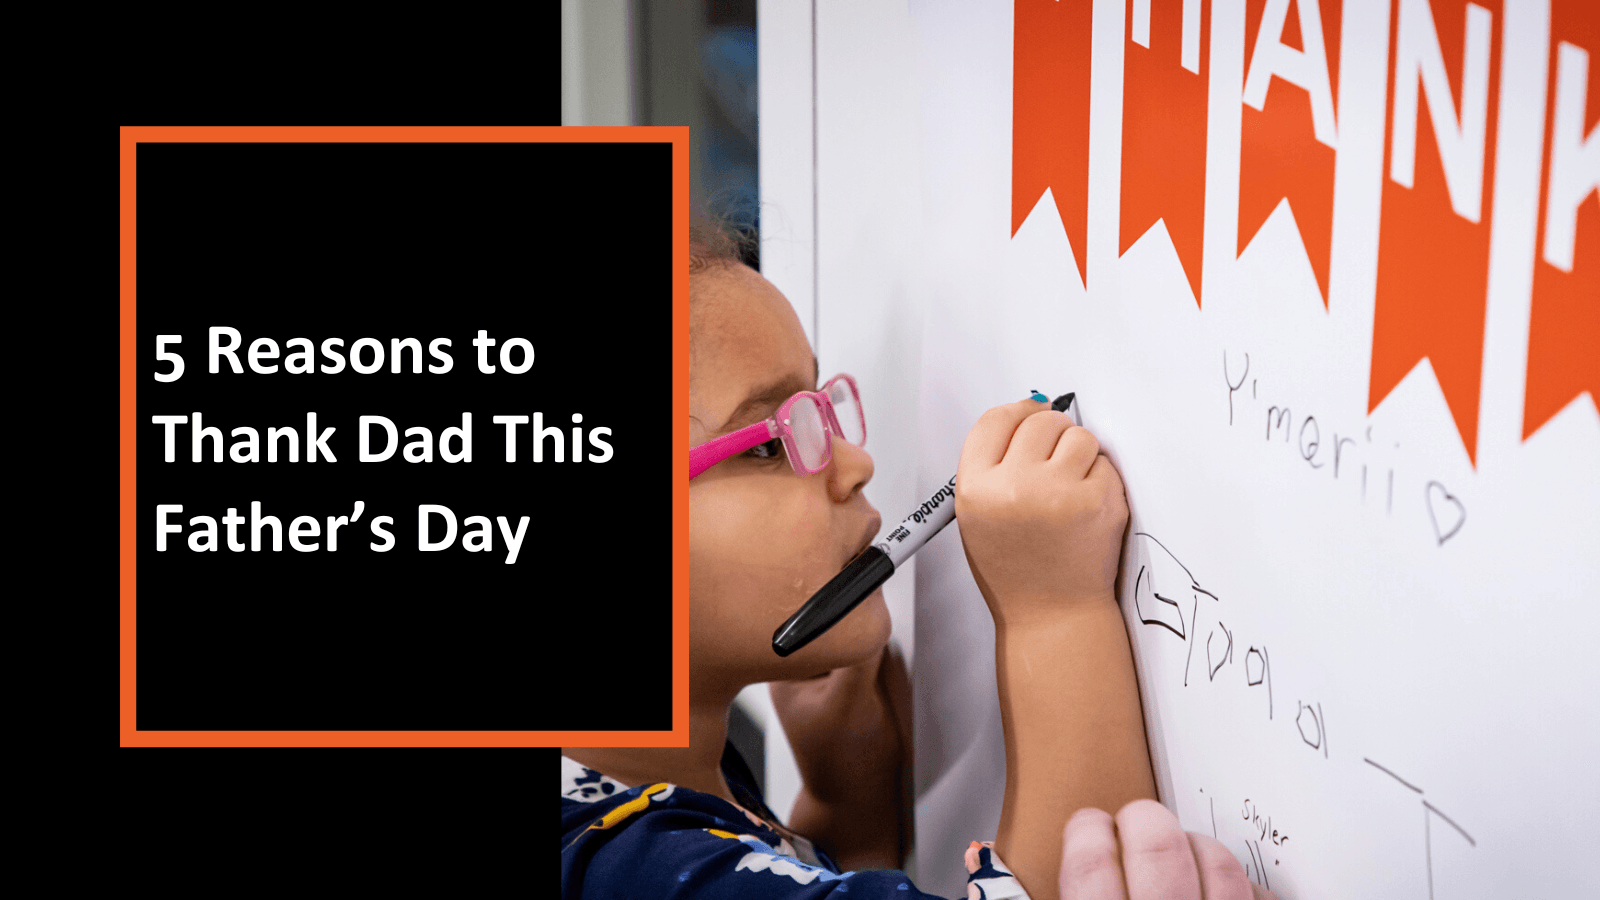 5 Reasons to Thank Dad This Father’s Day